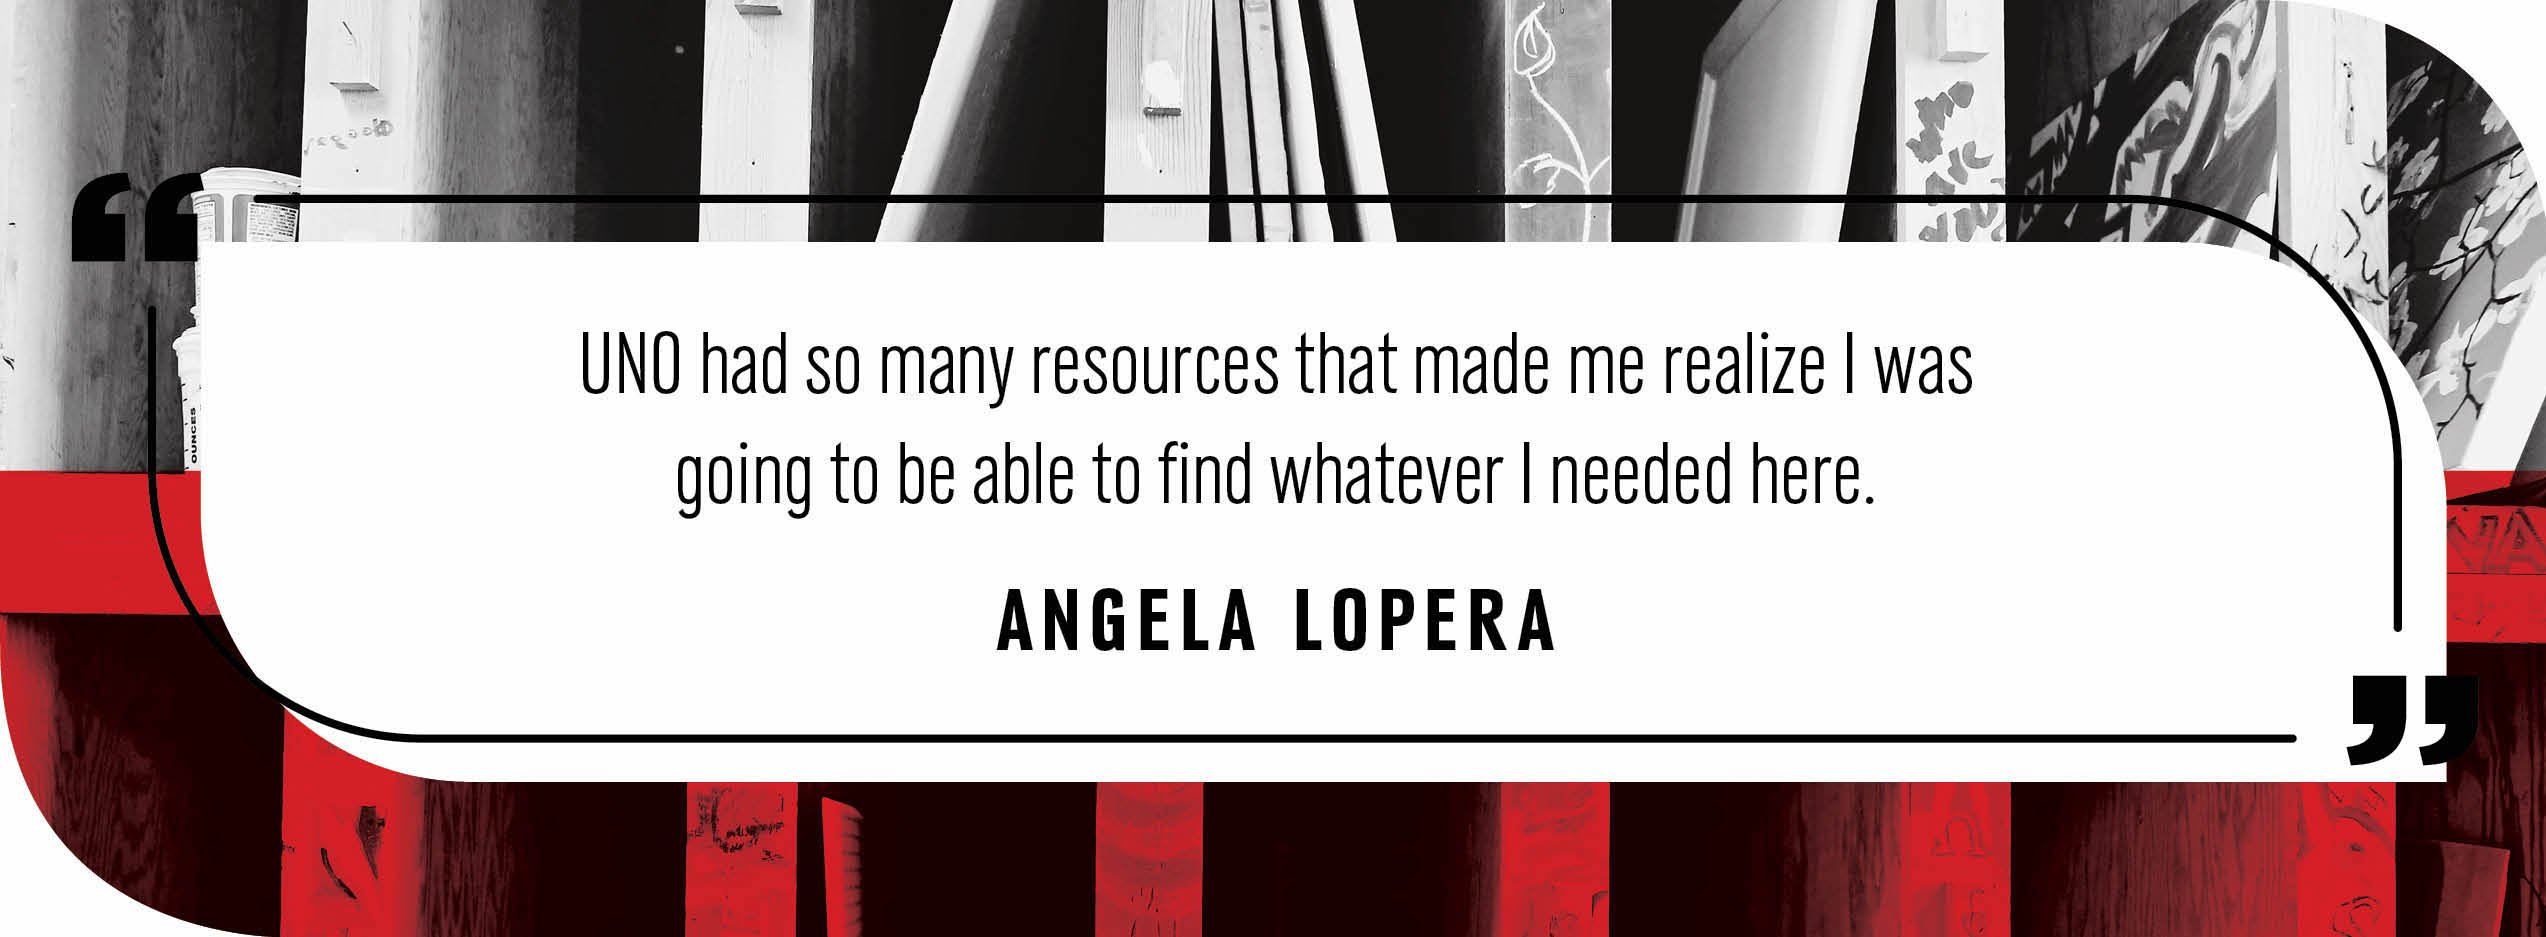 Quote by Angela Lopera: "UNO had so many resources that made me realize I was going to be able to find whatever I needed here."